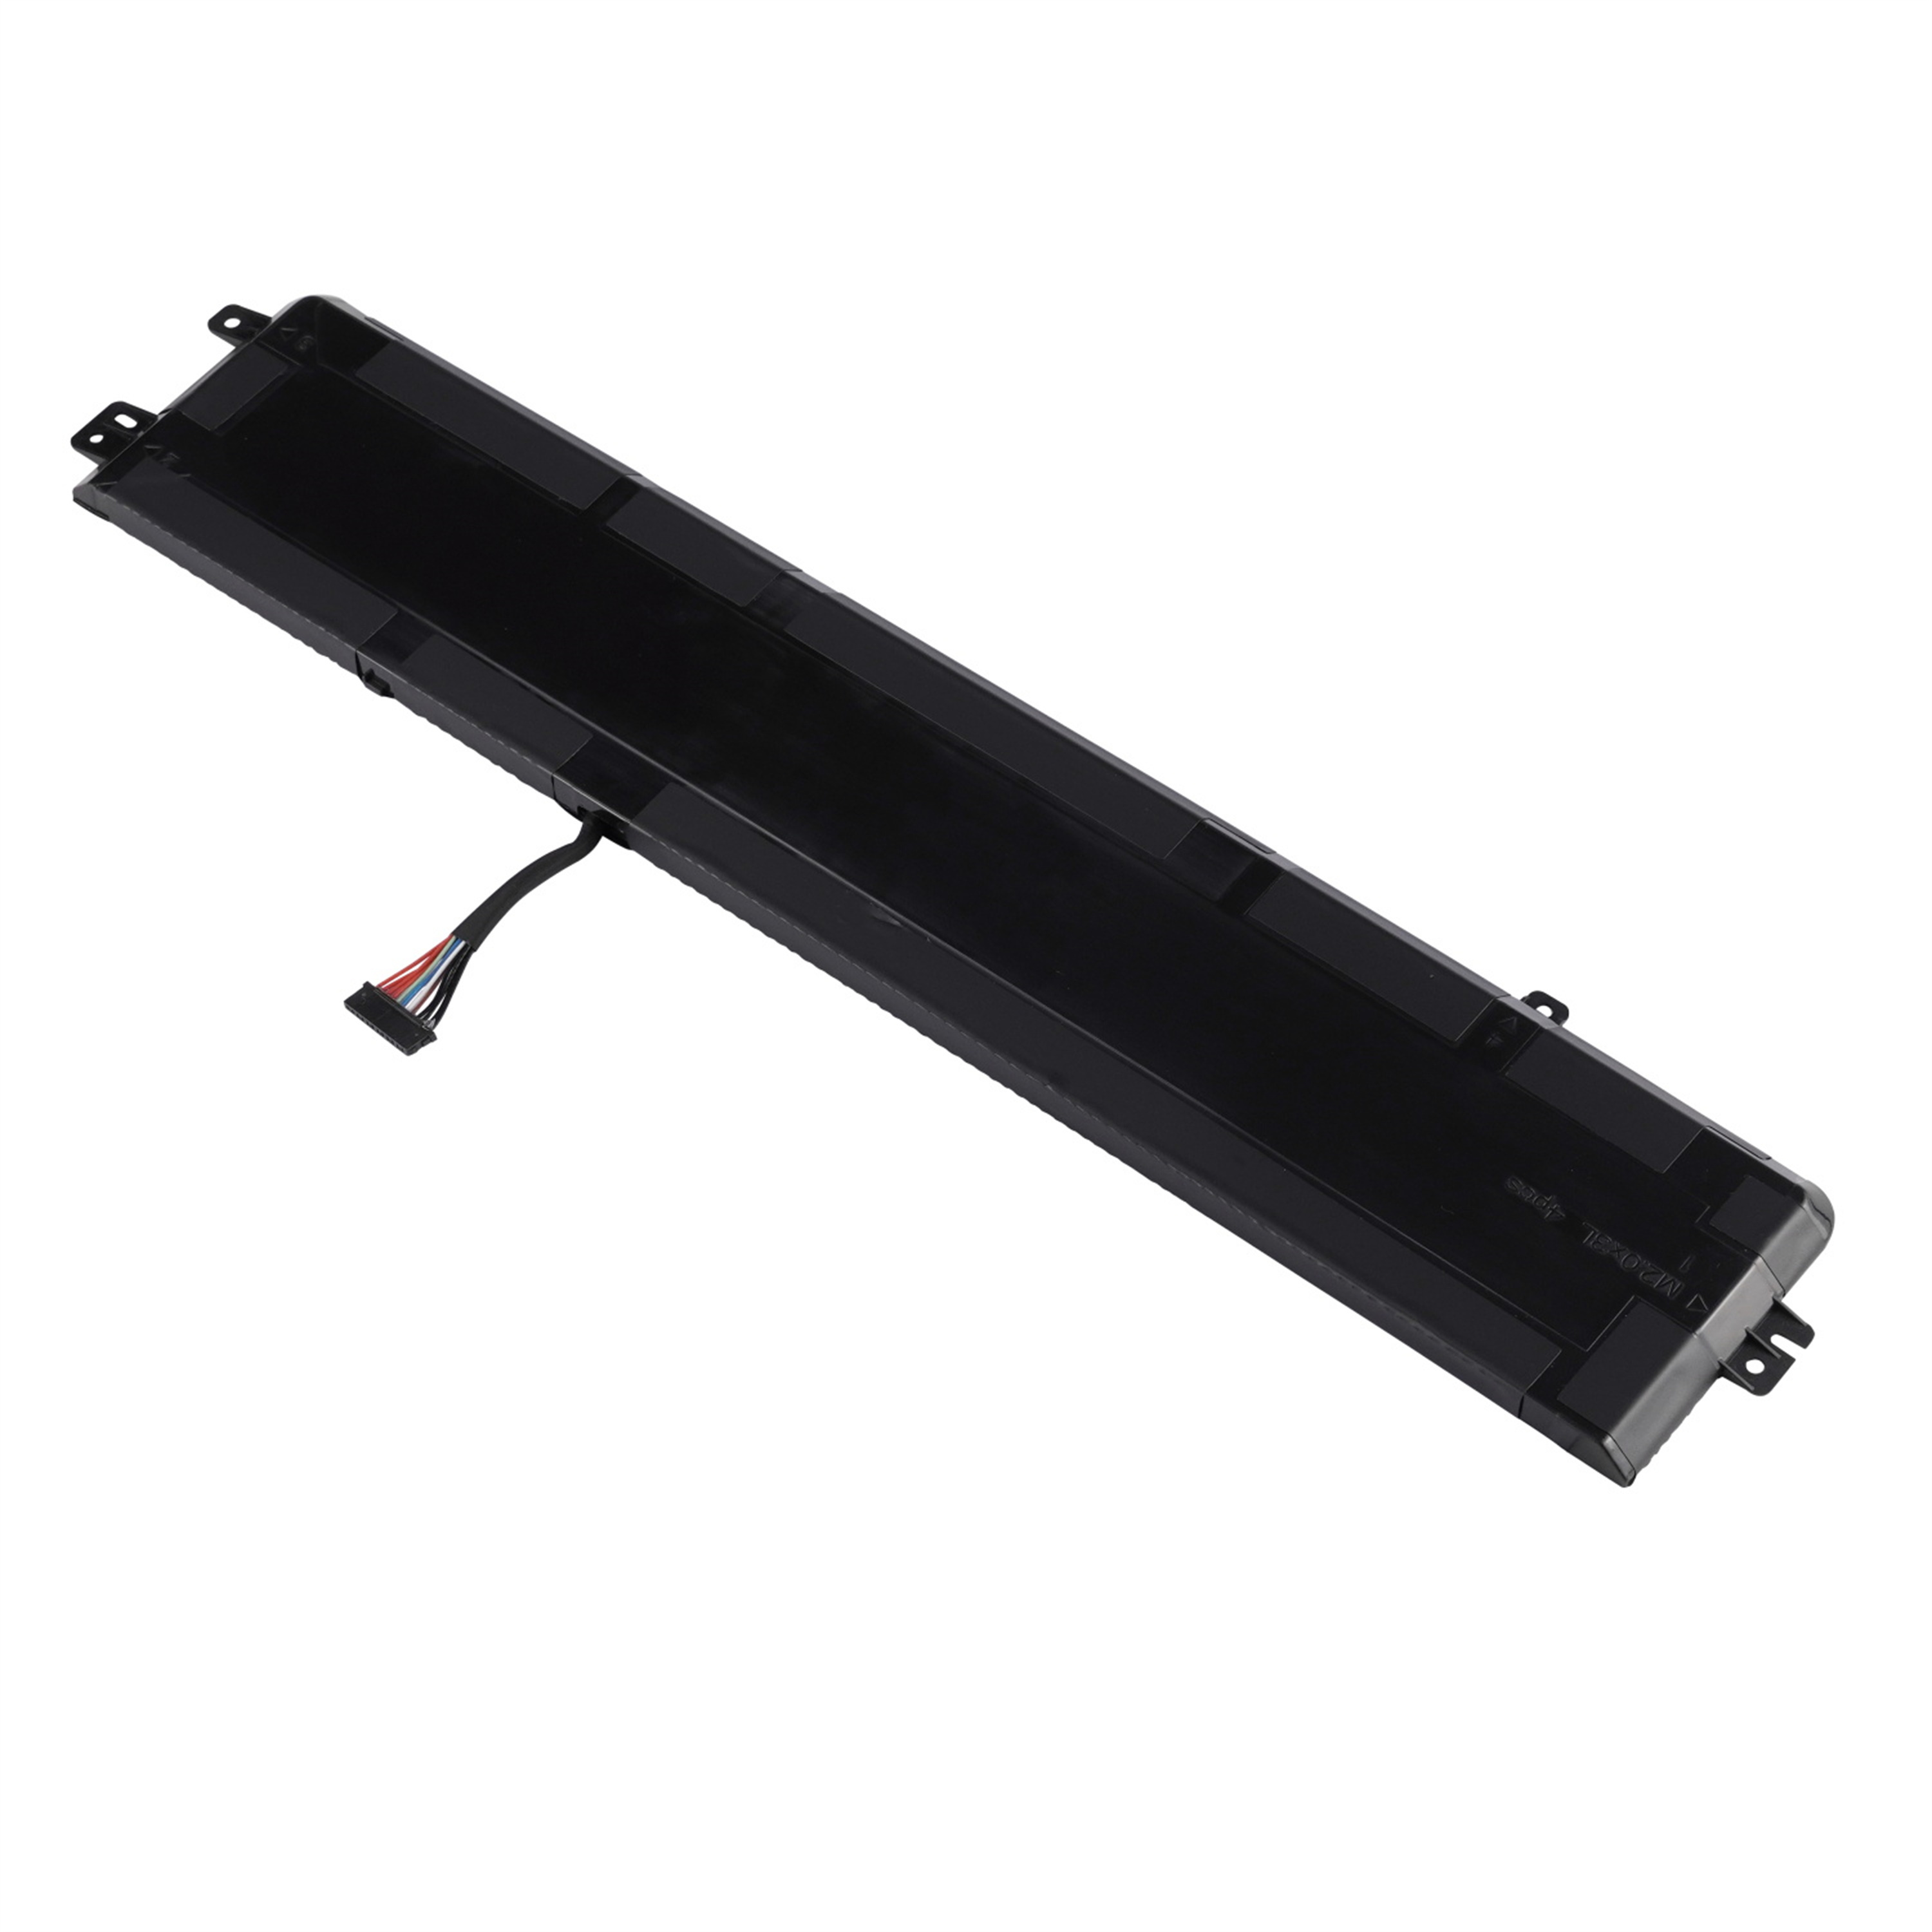 L14M3P24 rechargeable lithium ion Notebook battery Laptop battery For with Lenovo 拯救者R720 拯救者R720-15 拯救者R720-15IKB 拯救者R720-15IKBN 拯救者R720-15IKBM XiaoXin 700 XiaoXin 700-15ISK ideapad 700-15isk